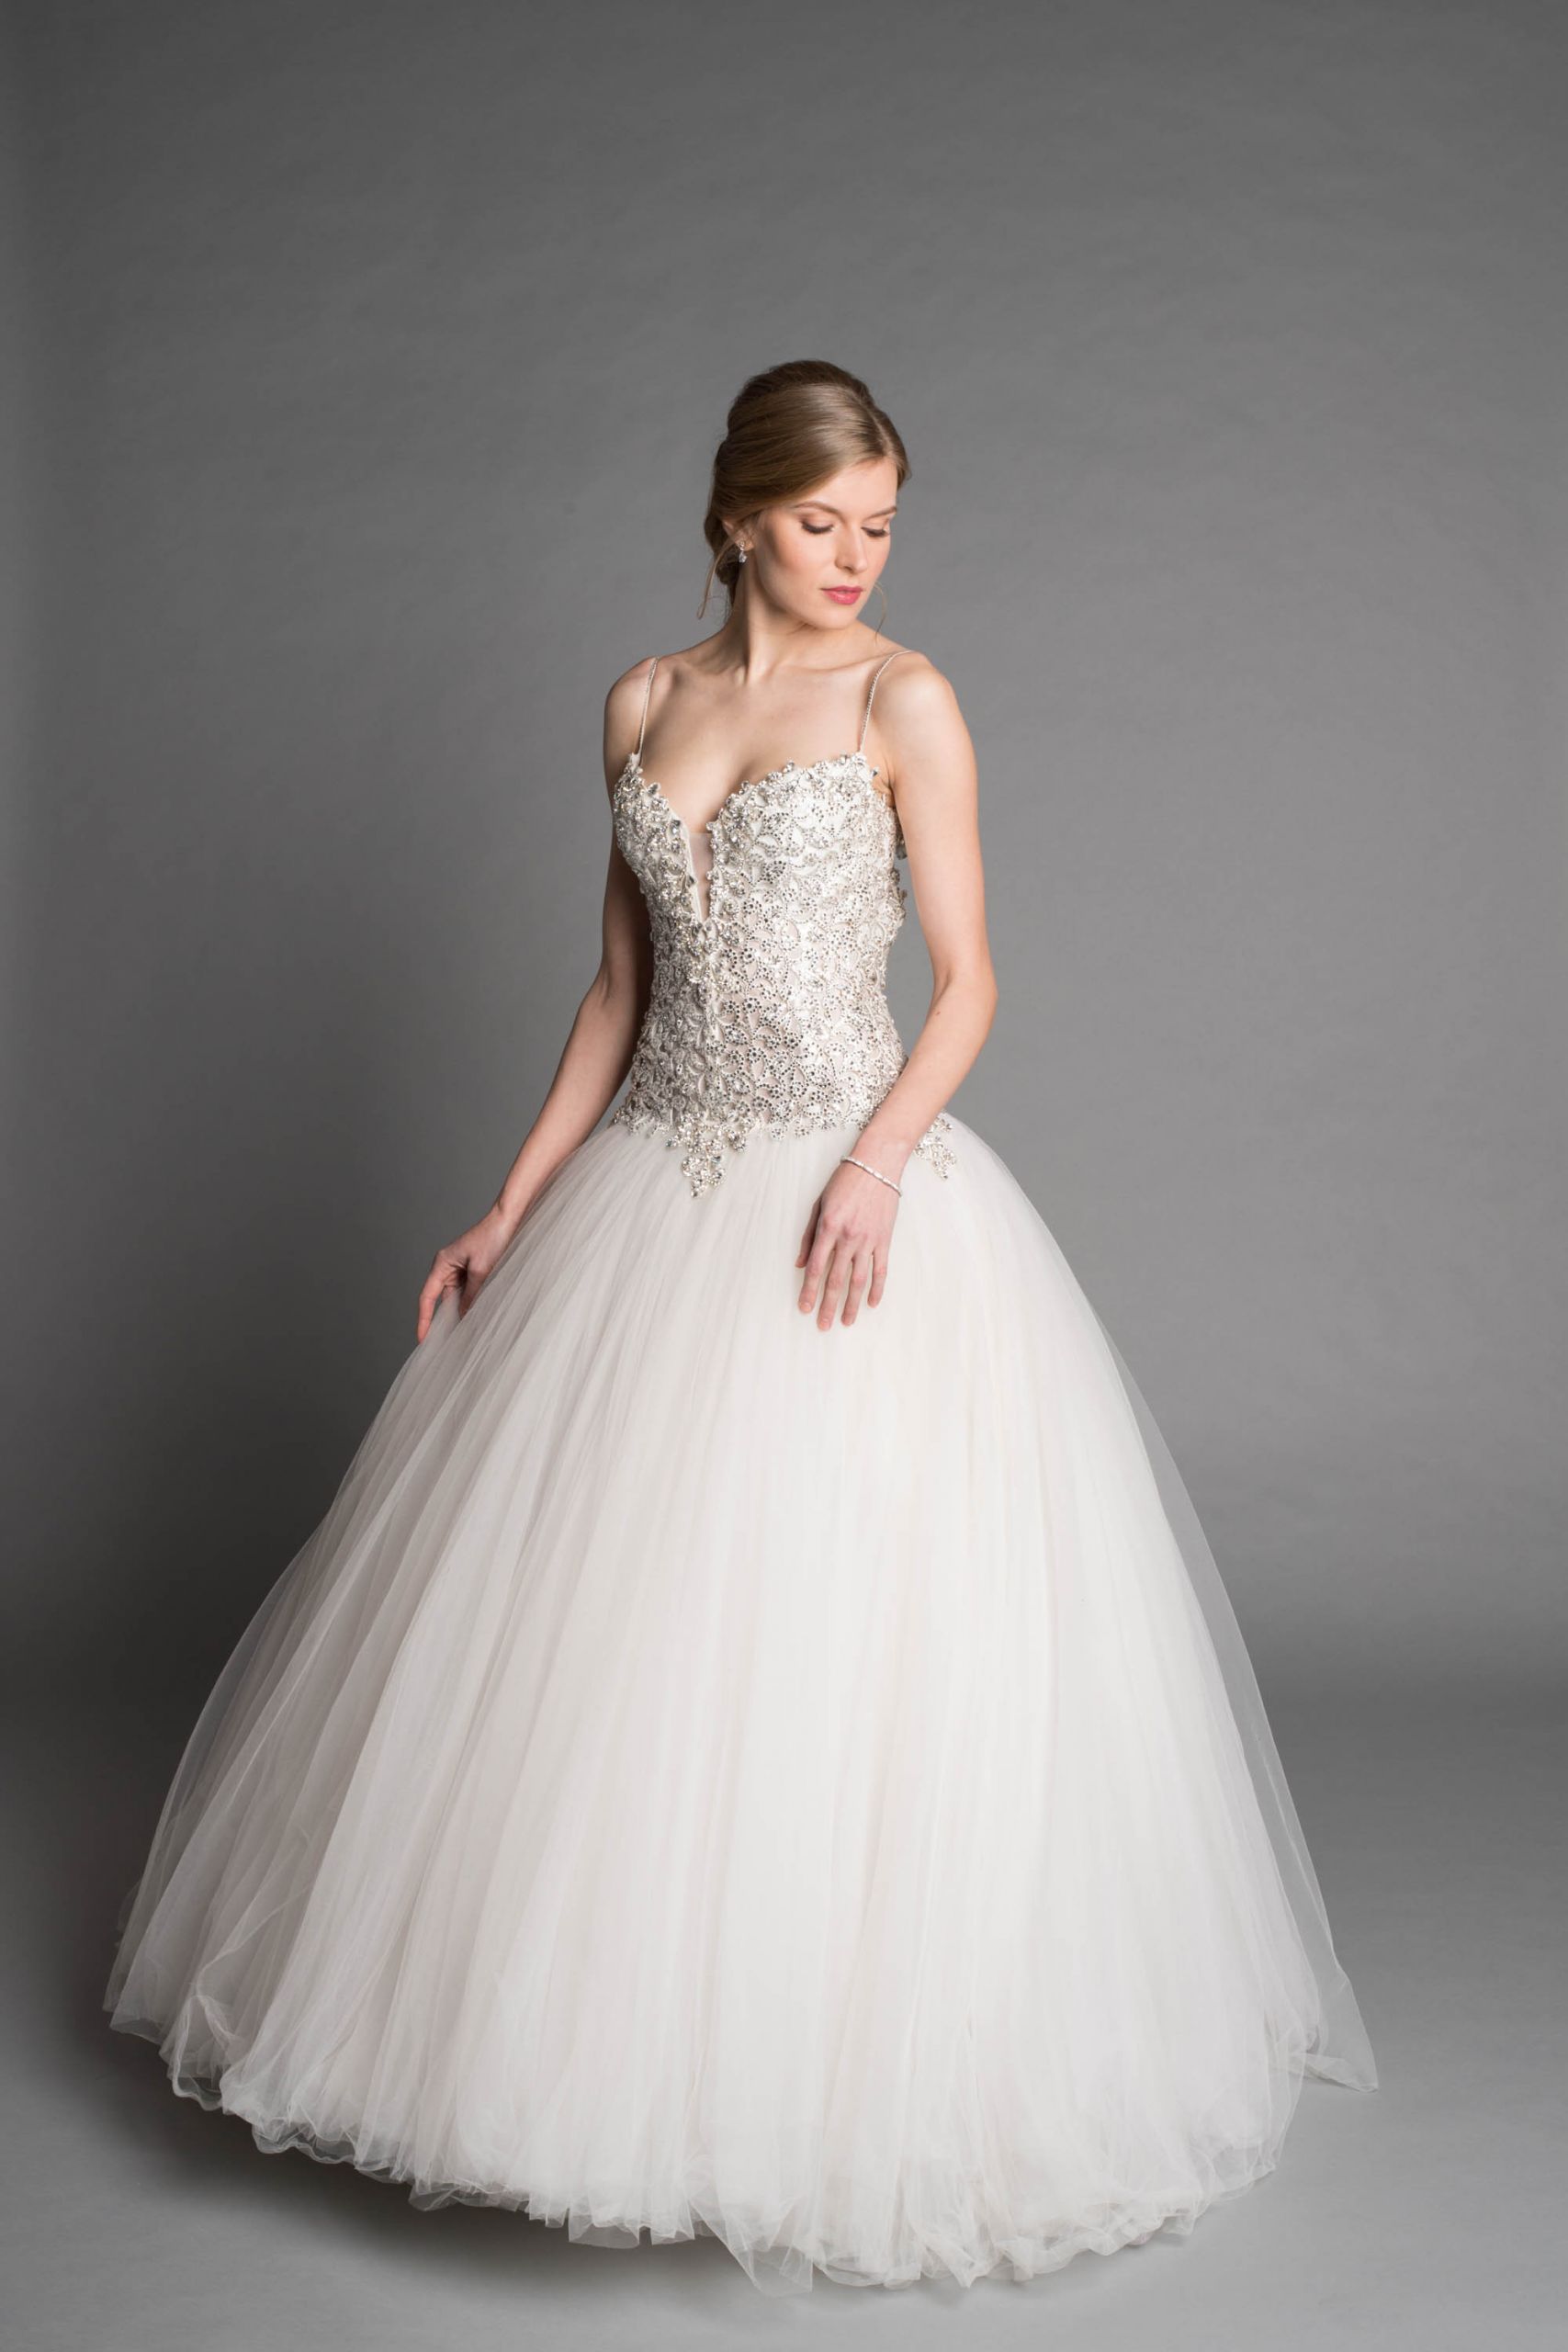 23 Ideas for Kleinfeld Wedding Gowns - Home, Family, Style and Art Ideas